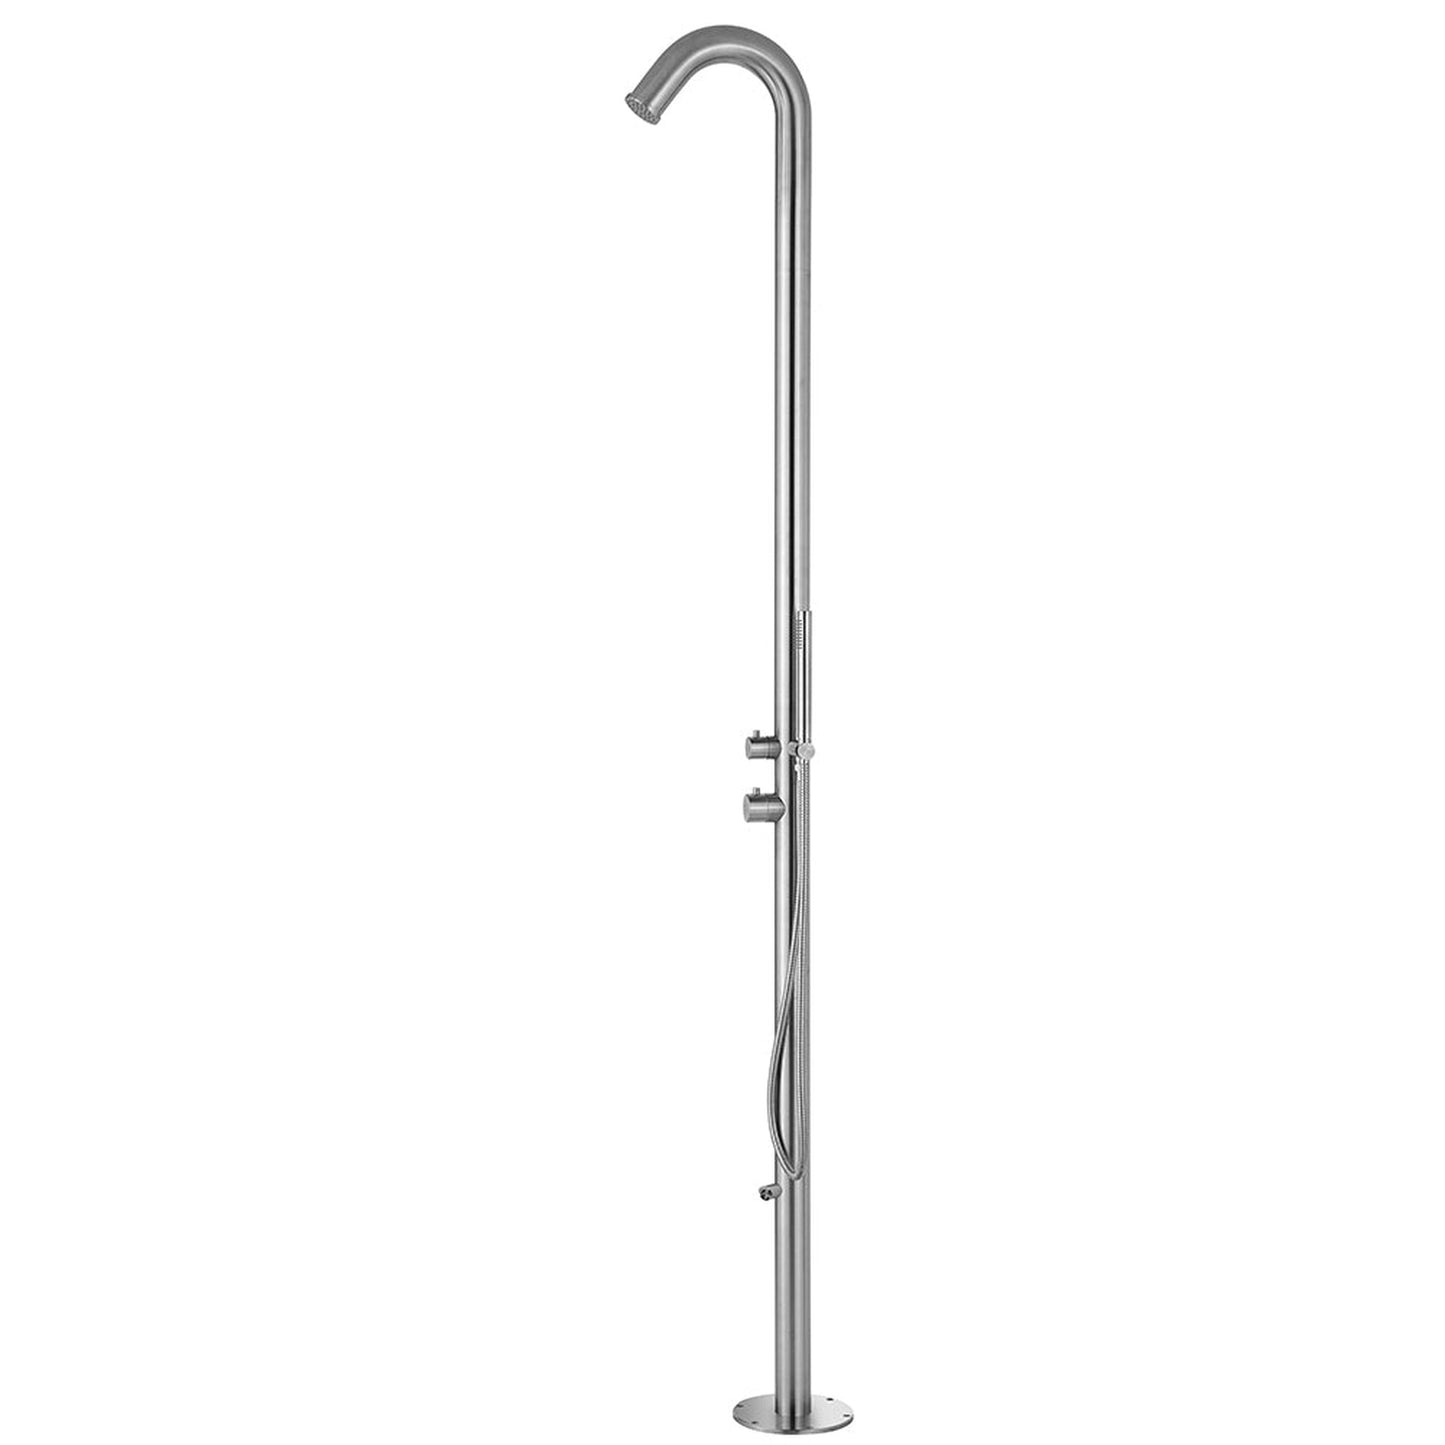 PULSE ShowerSpas Wave Rain Showerhead With Single Function Hand Shower Wand 2.5 GPM Outdoor Shower in Brushed Stainless Steel Finish